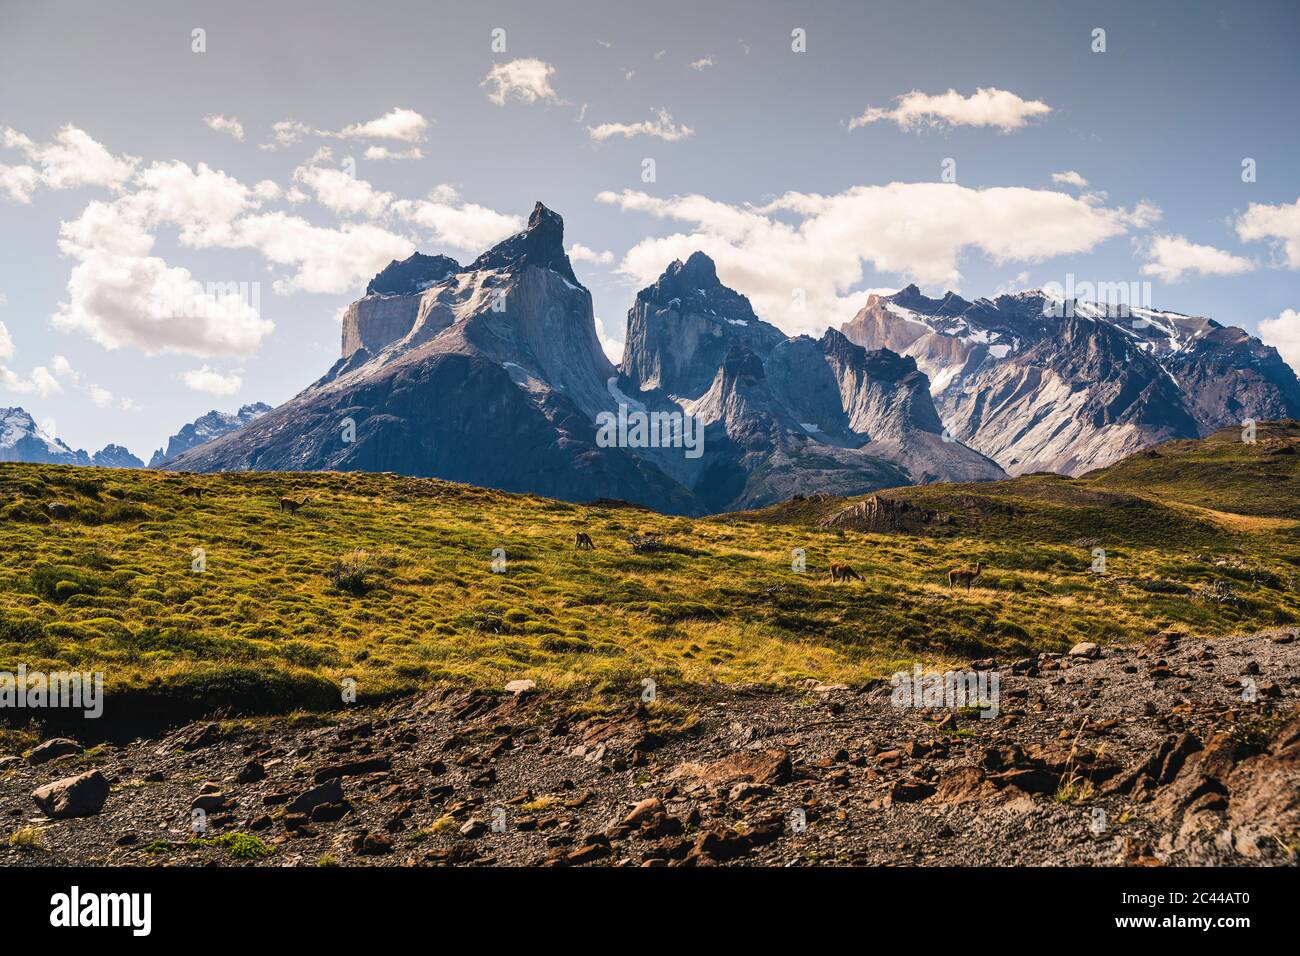 Chile, Guanacos (Lama guanicoe) grazing in Torres Del Paine National Park with Cuernos Del Paine in background Stock Photo